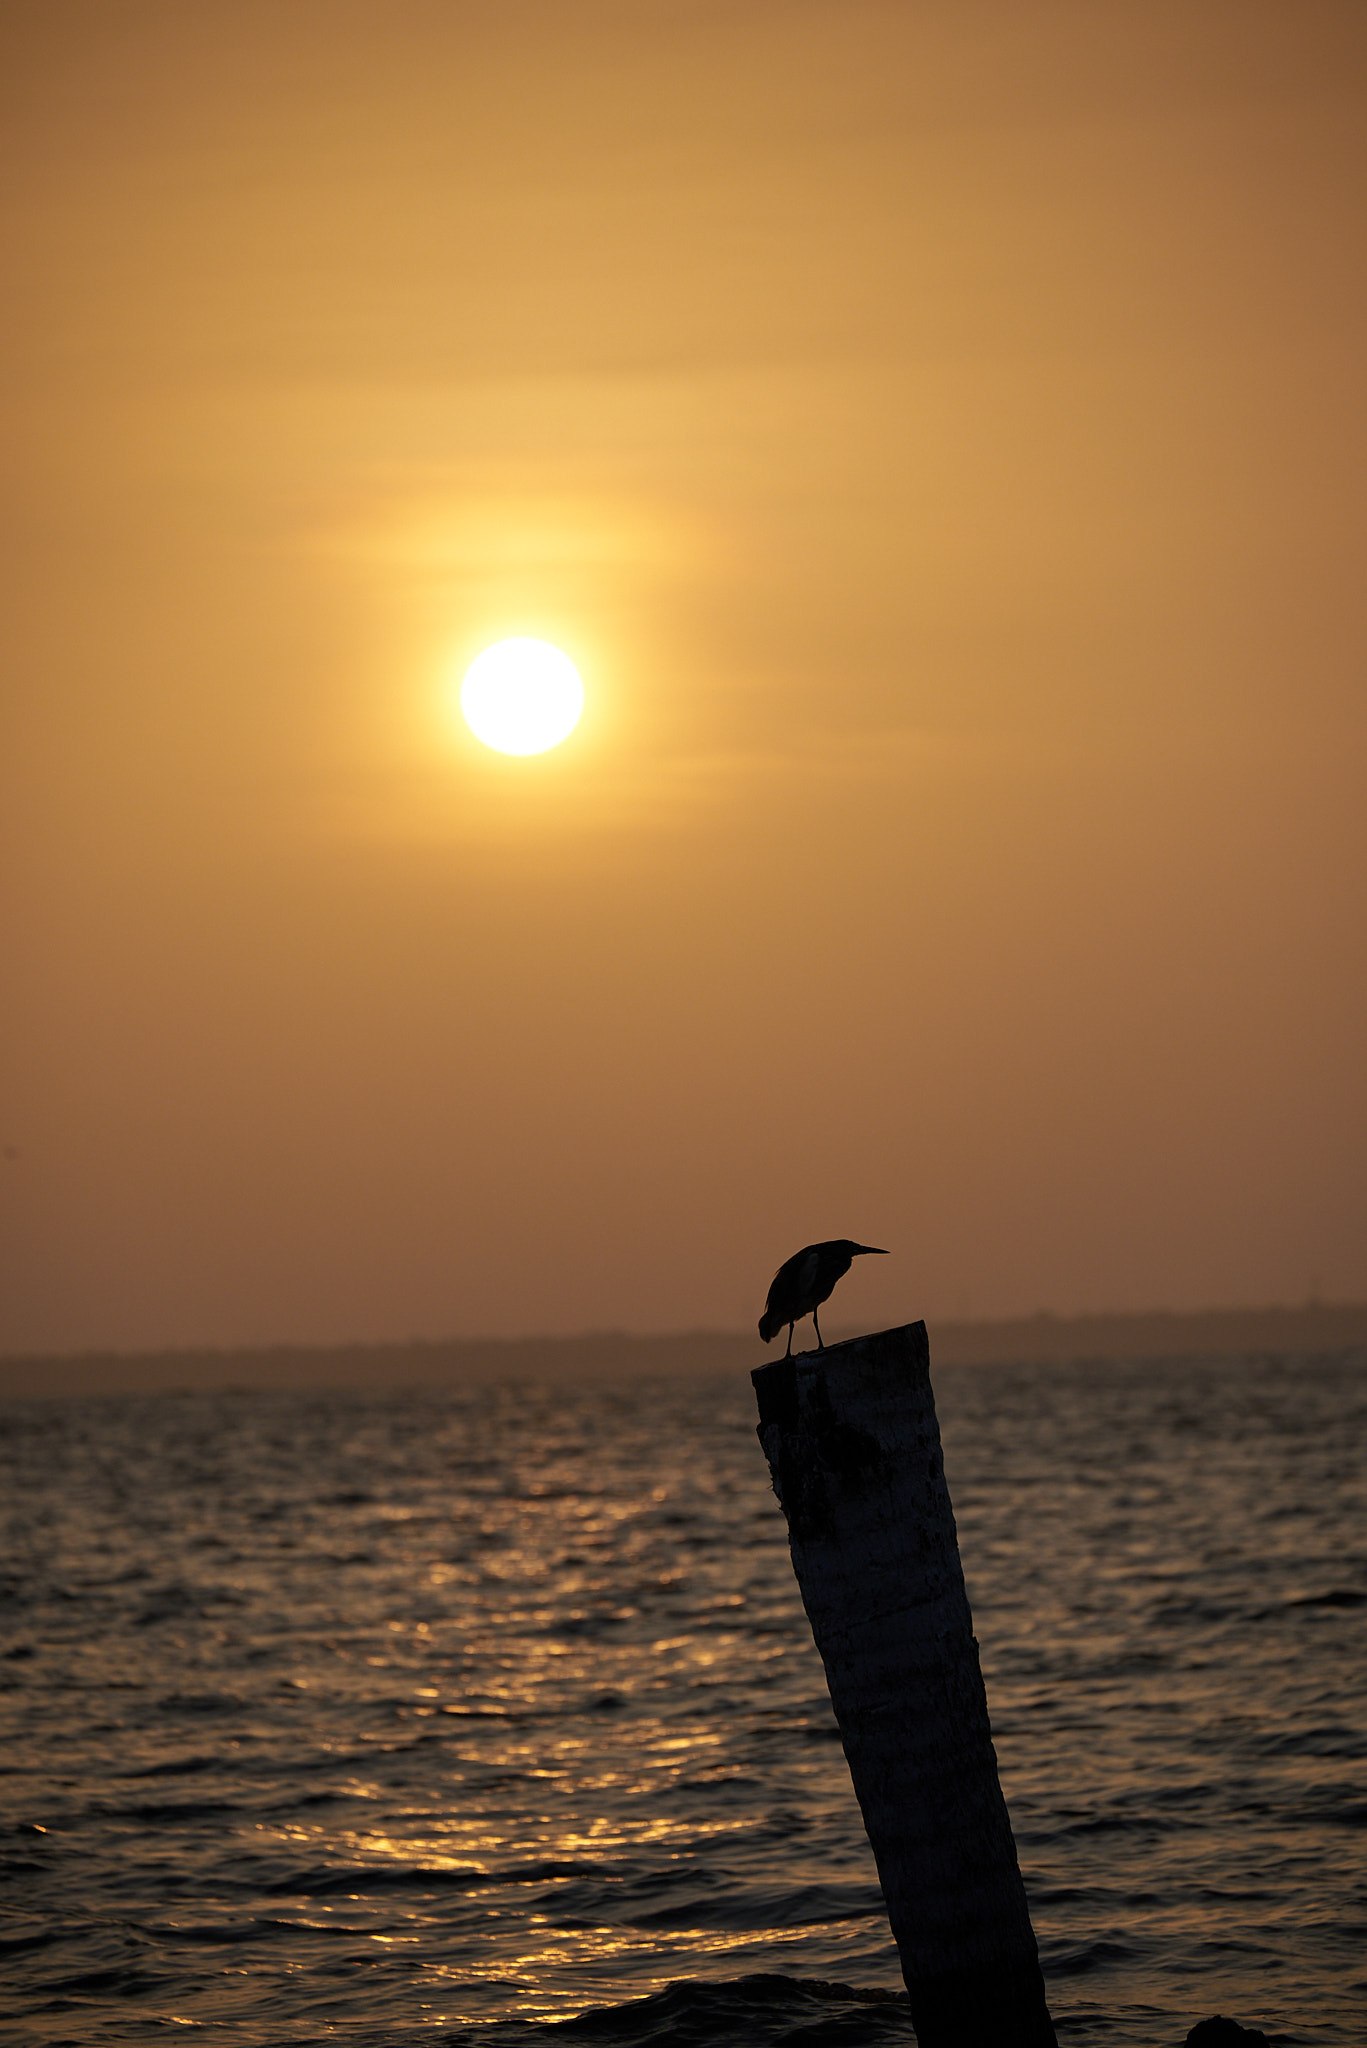 Sunset by the Vembanad Lake